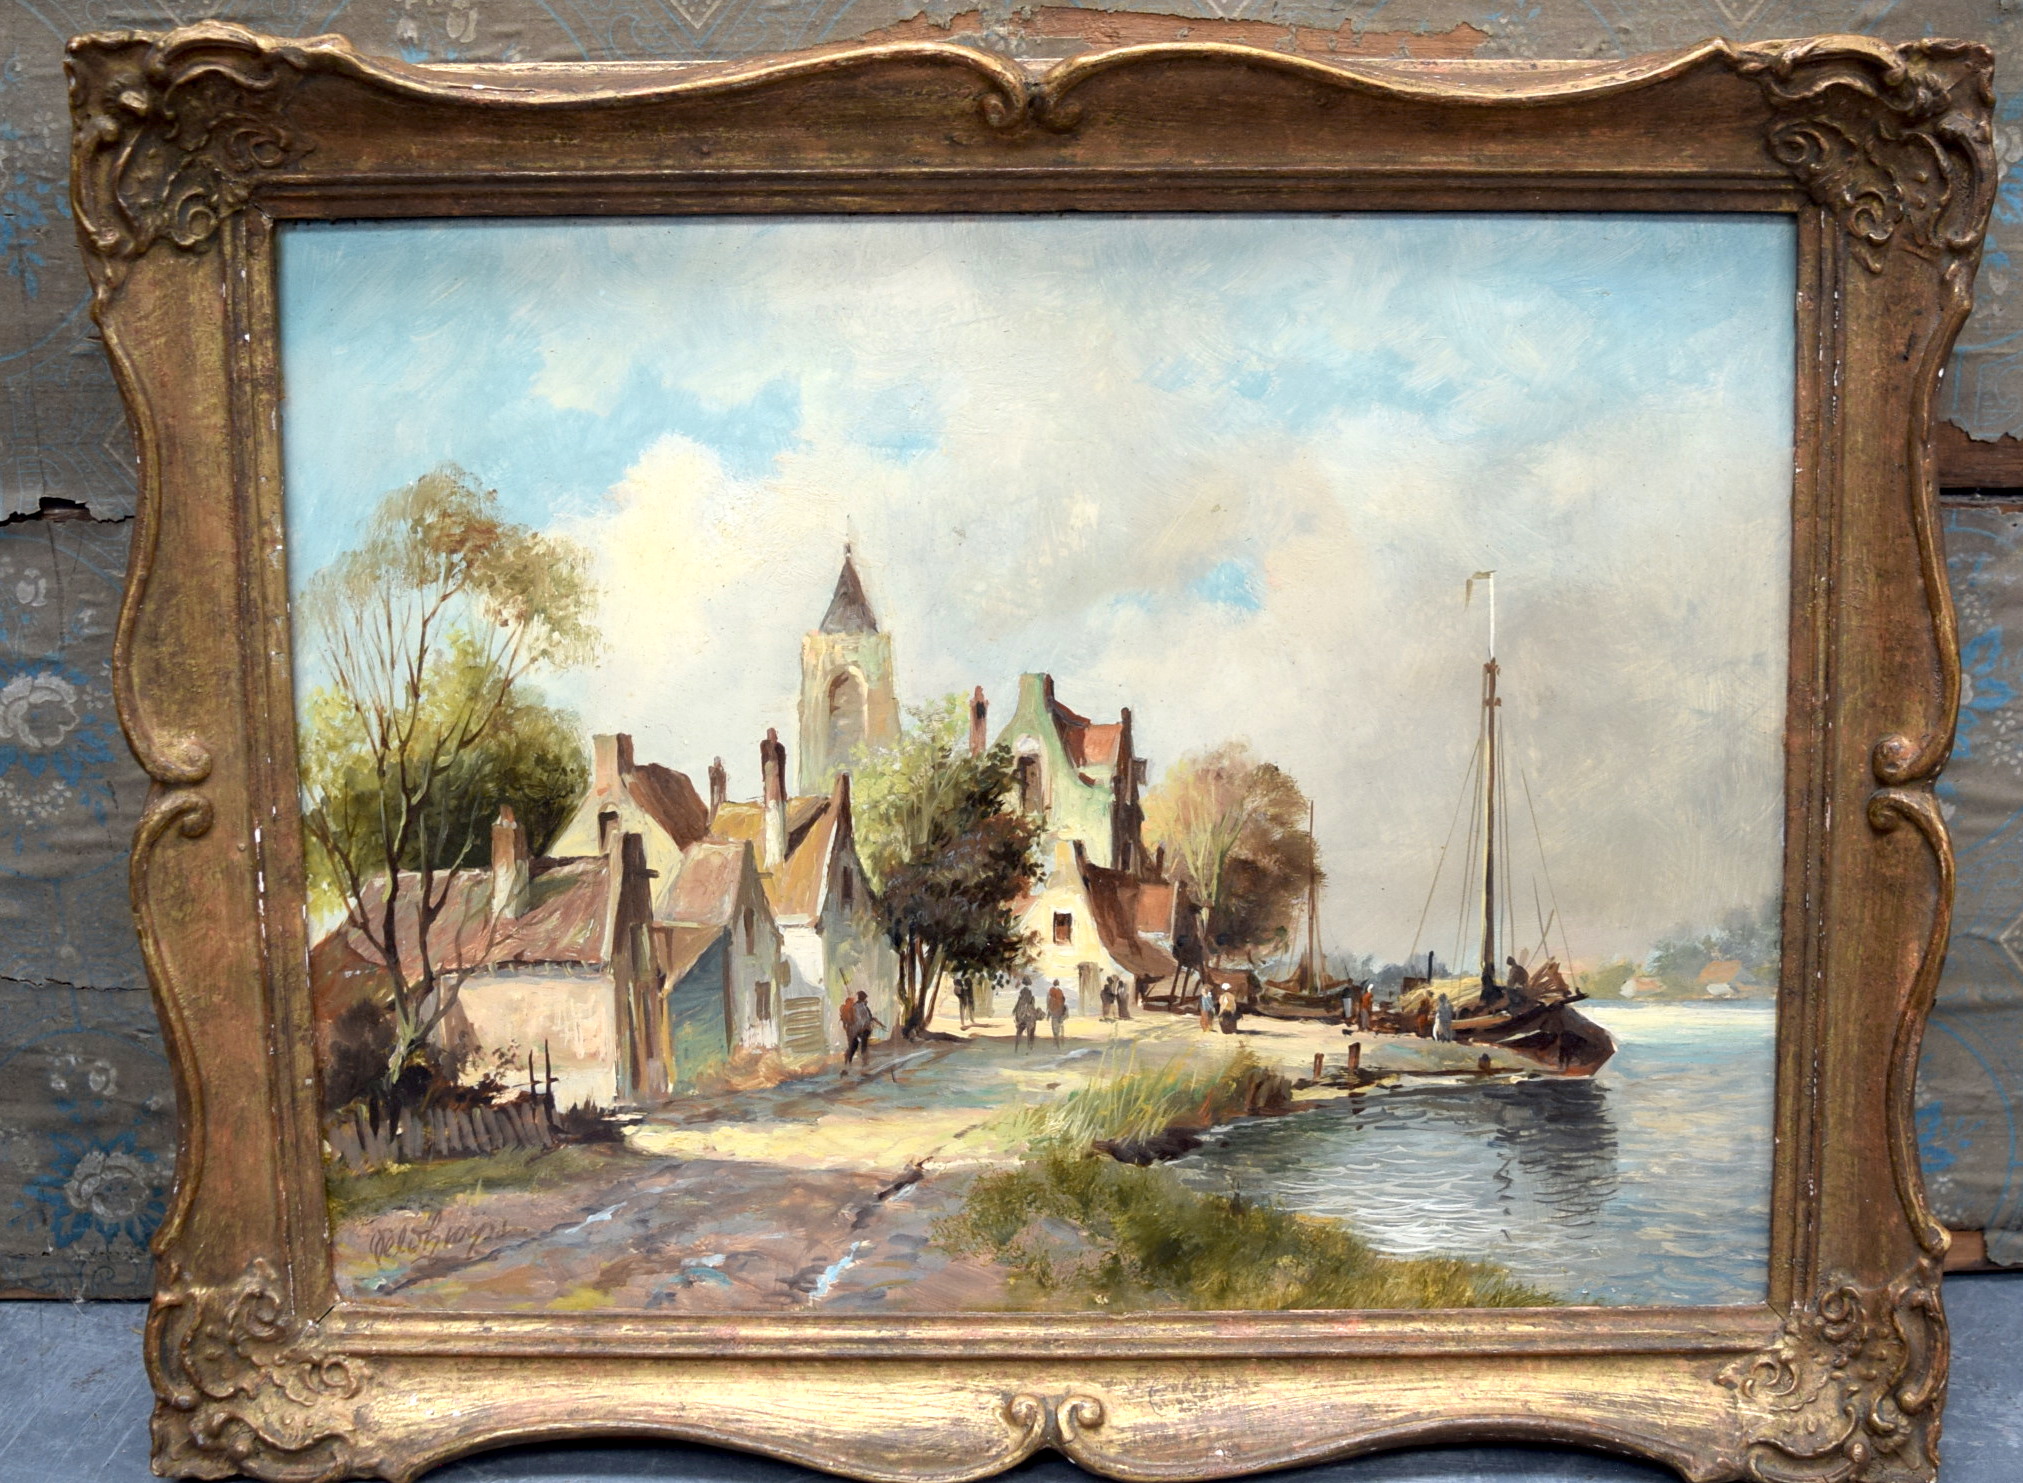 CONTINENTAL SCHOOL (19th/20th century) FRAMED OIL ON PANEL, indistinctly signed, figures in a river